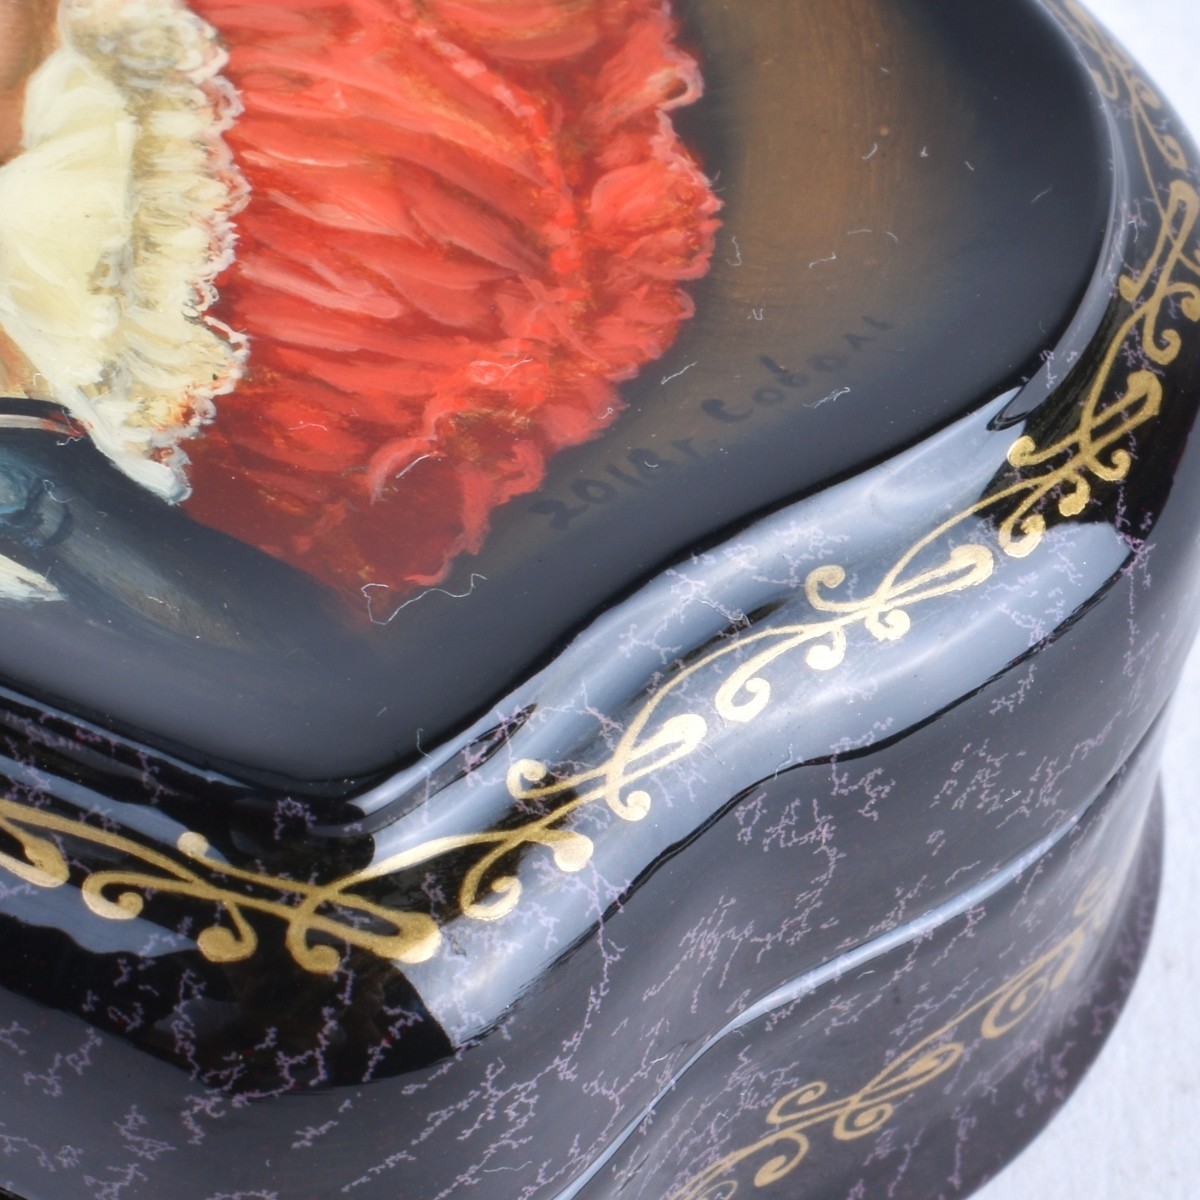 Russian Lacquered Key Hole Form Covered Box